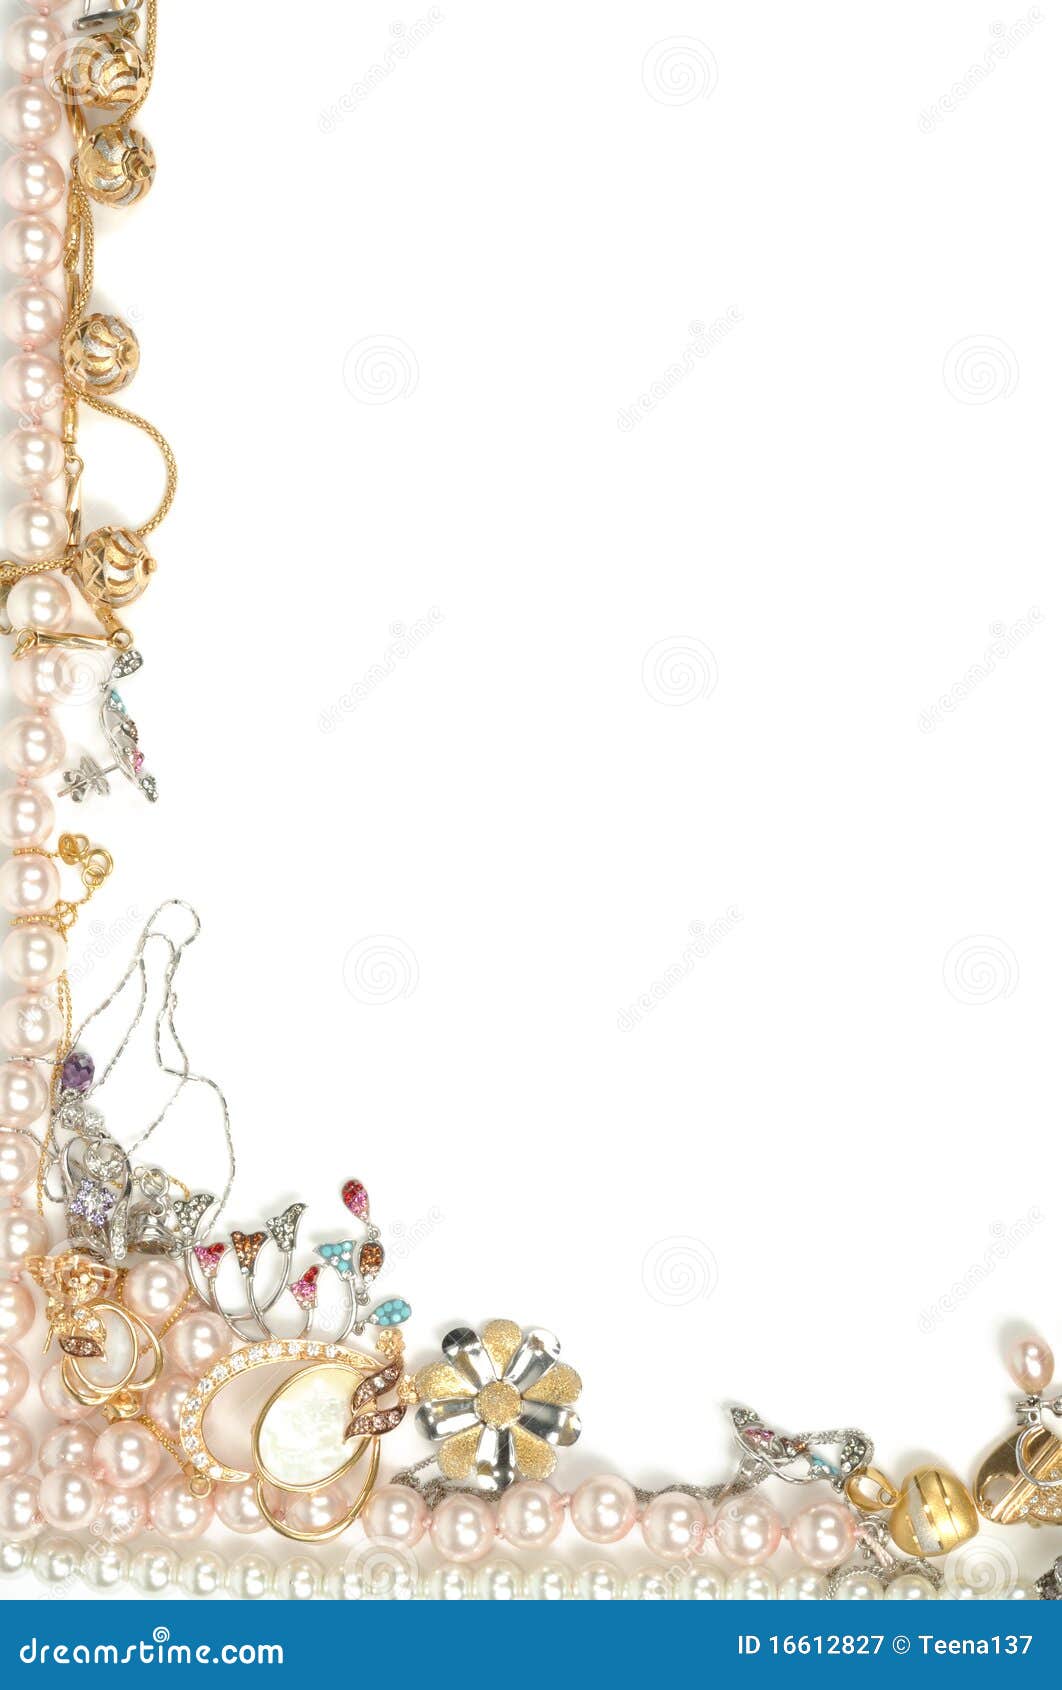 clip art for jewelry business - photo #13